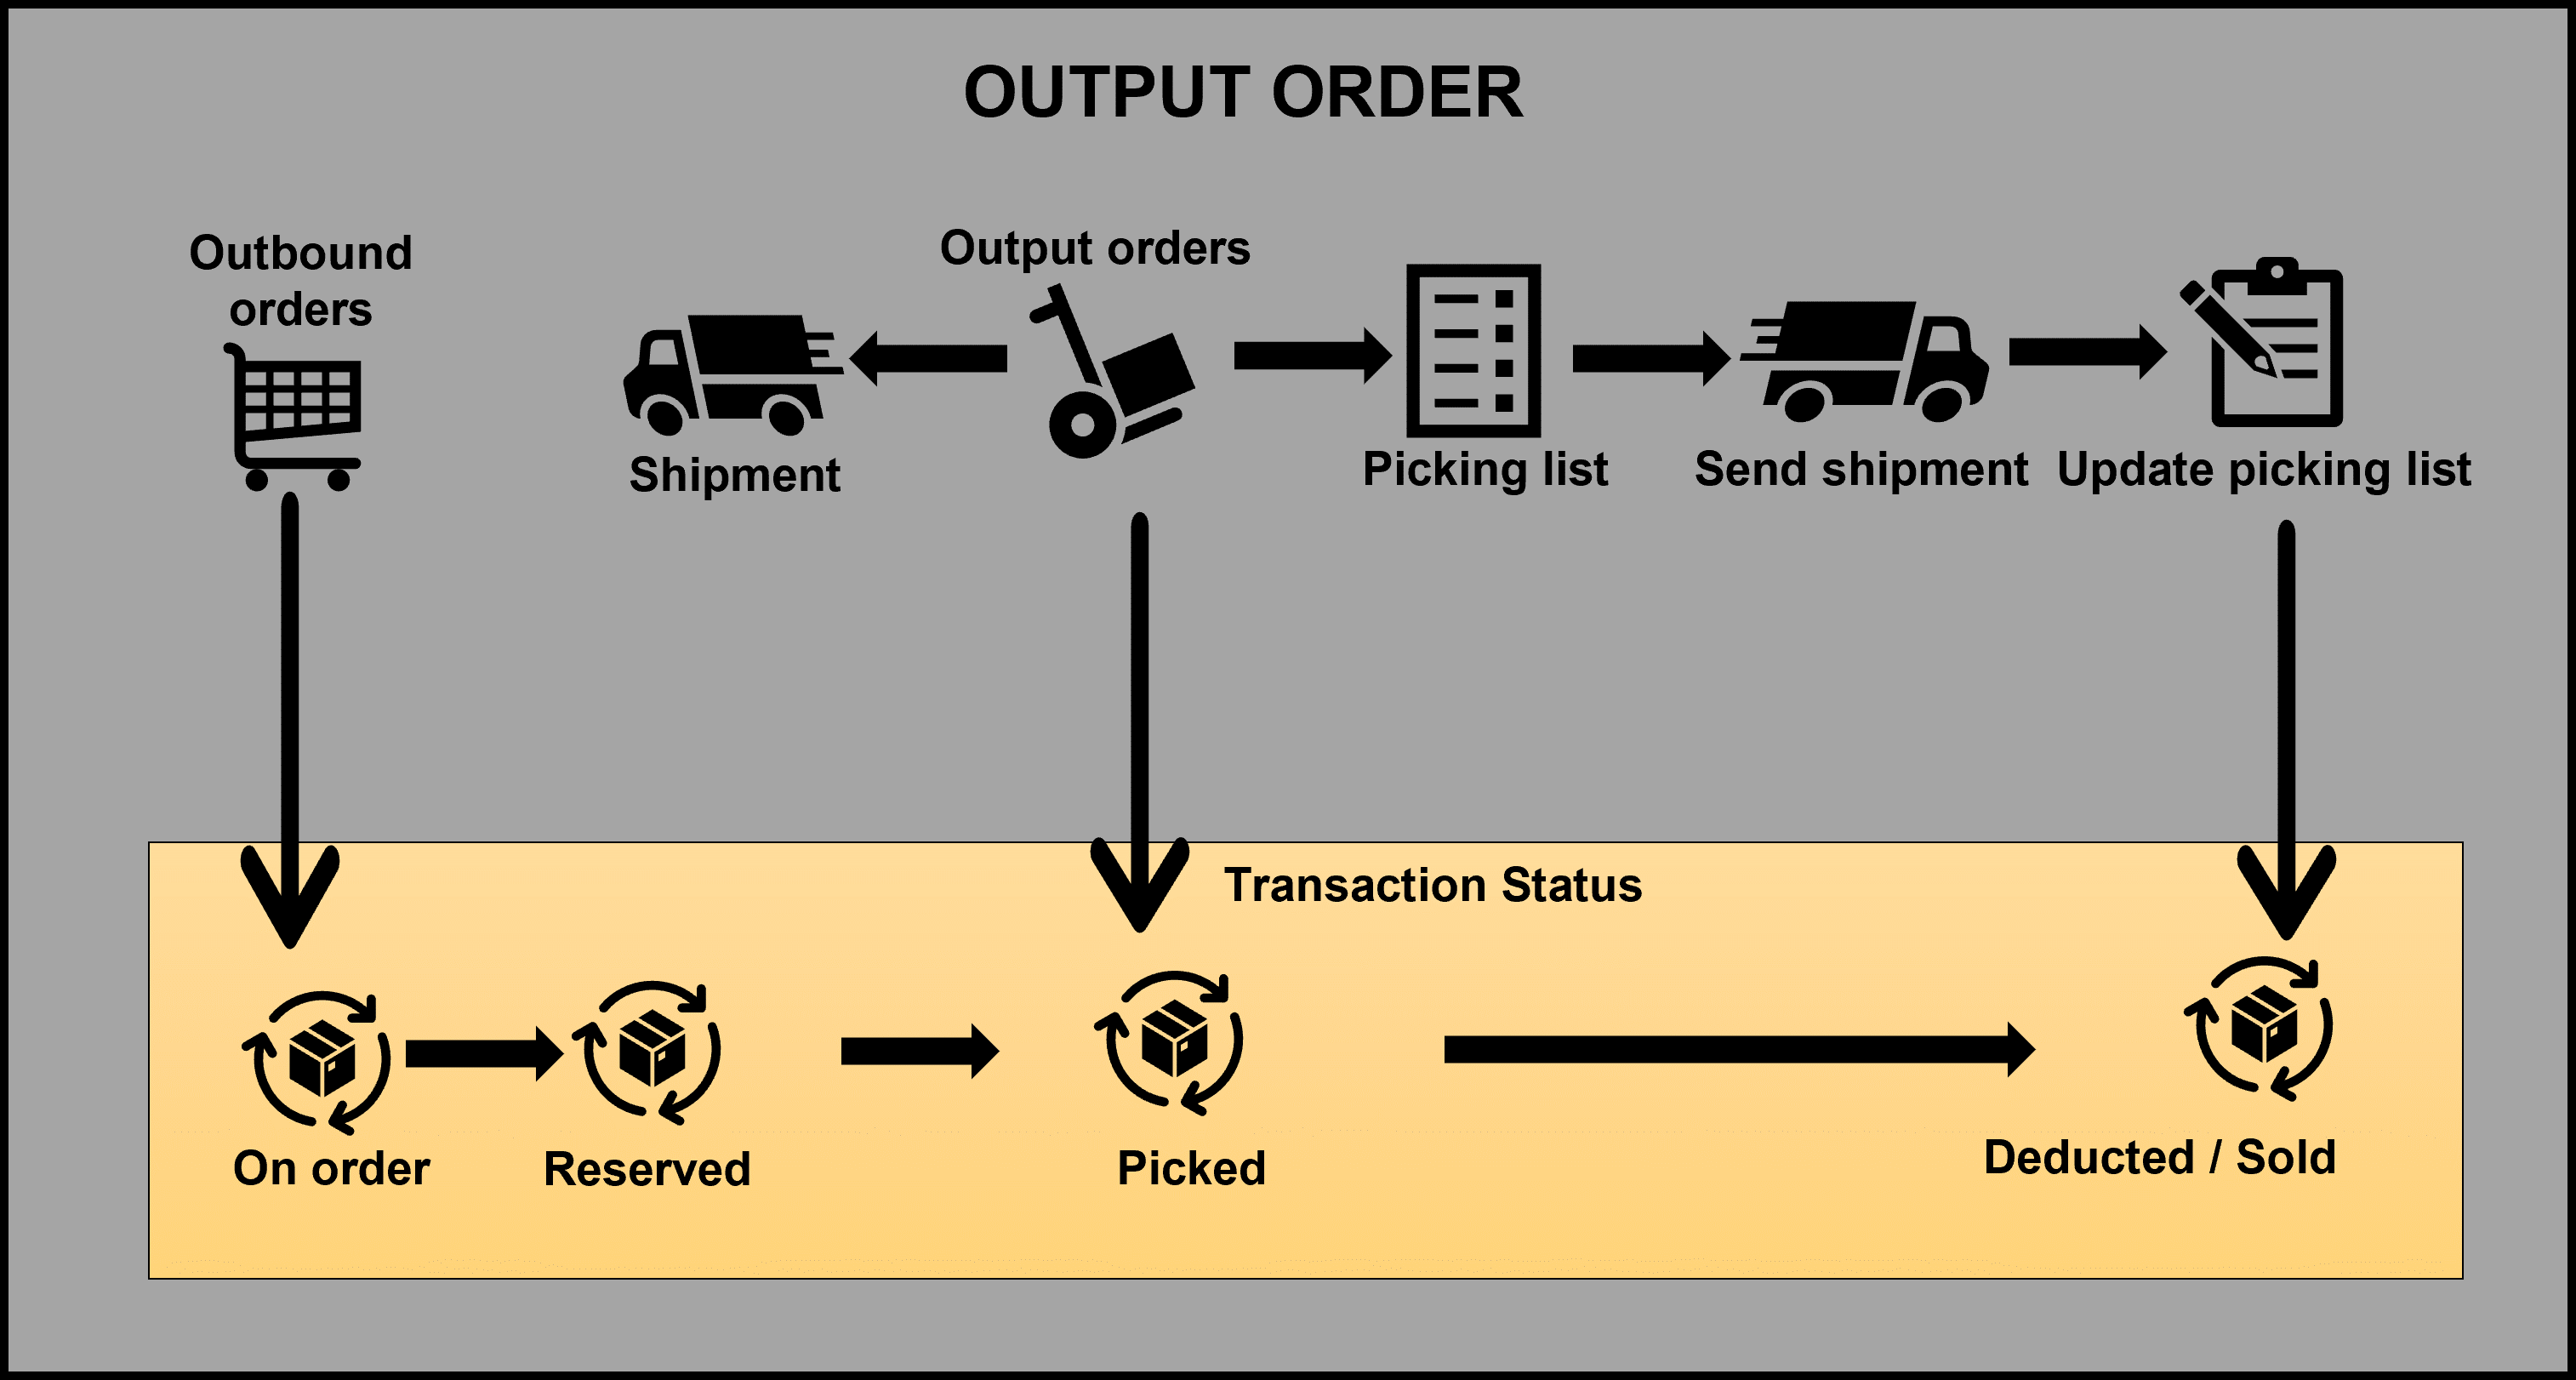 Diagram depicts the overview of the process for outbound orders and the corresponding transaction status.